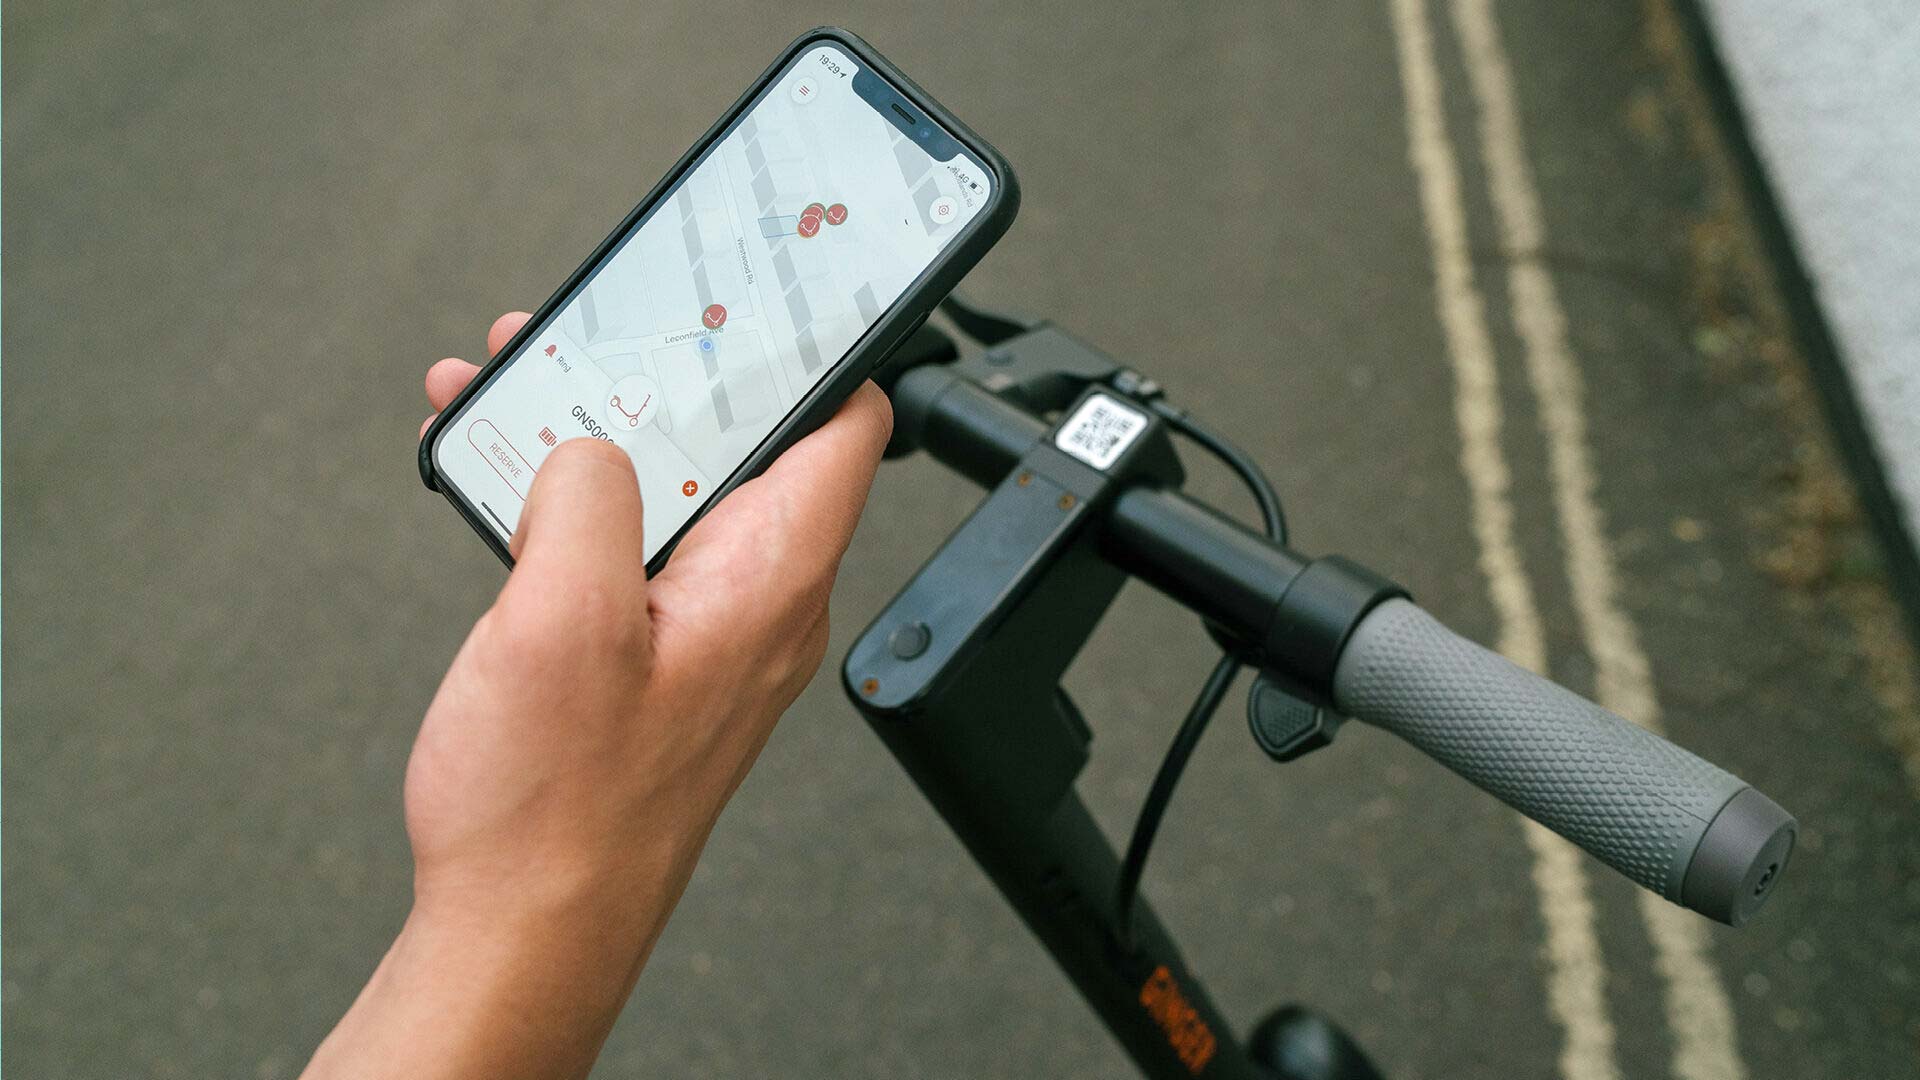 First UK e-scooter trial begins